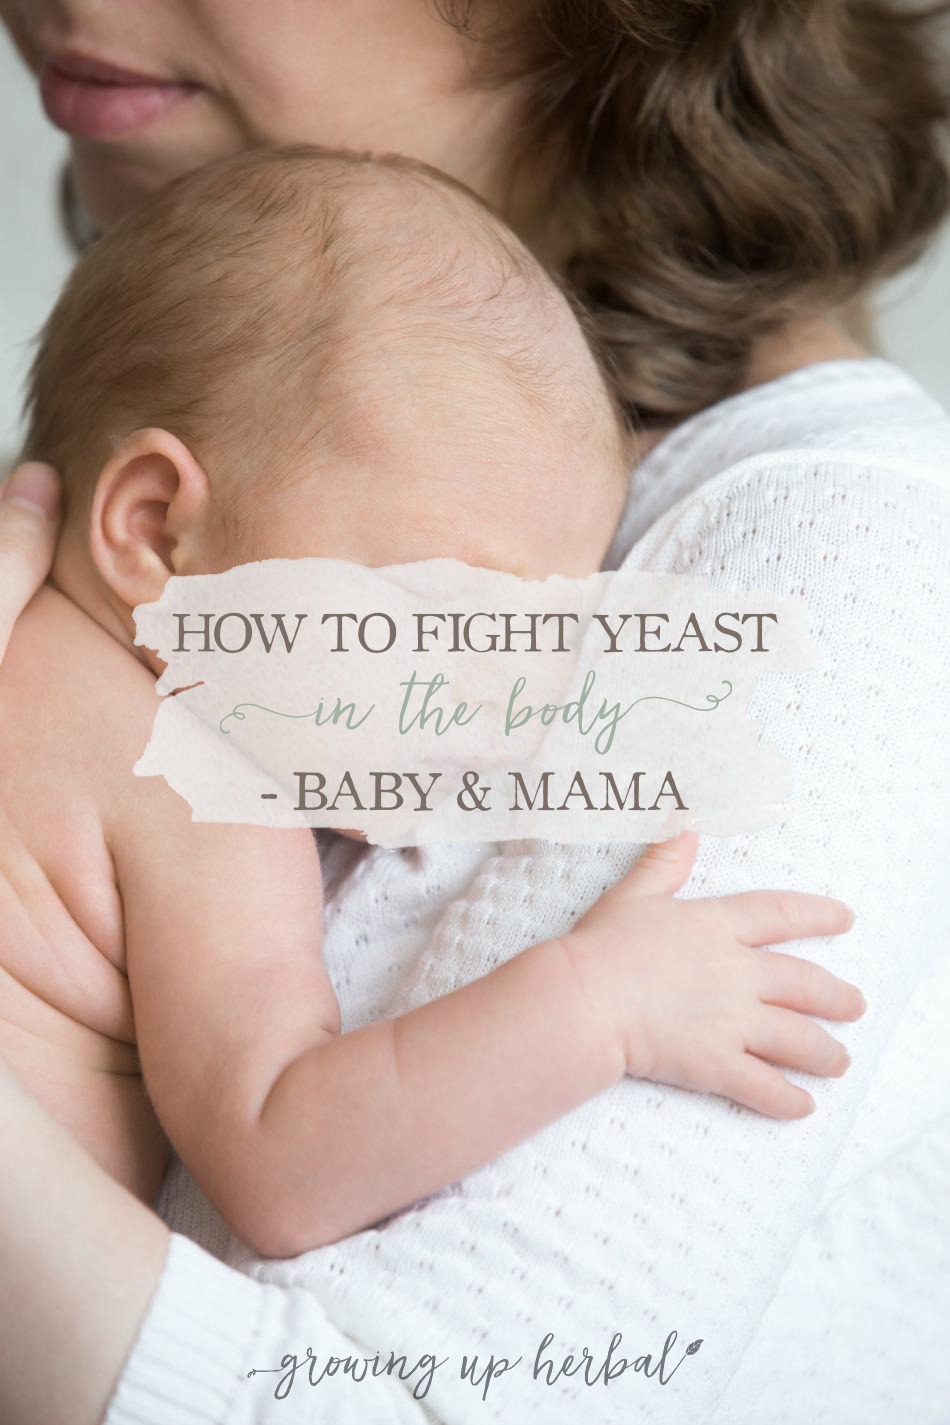 How to Fight Yeast In The Body - Baby & Mama | GrowingUpHerbal.com | How to overcome thrush and yeast issues in baby and mama.